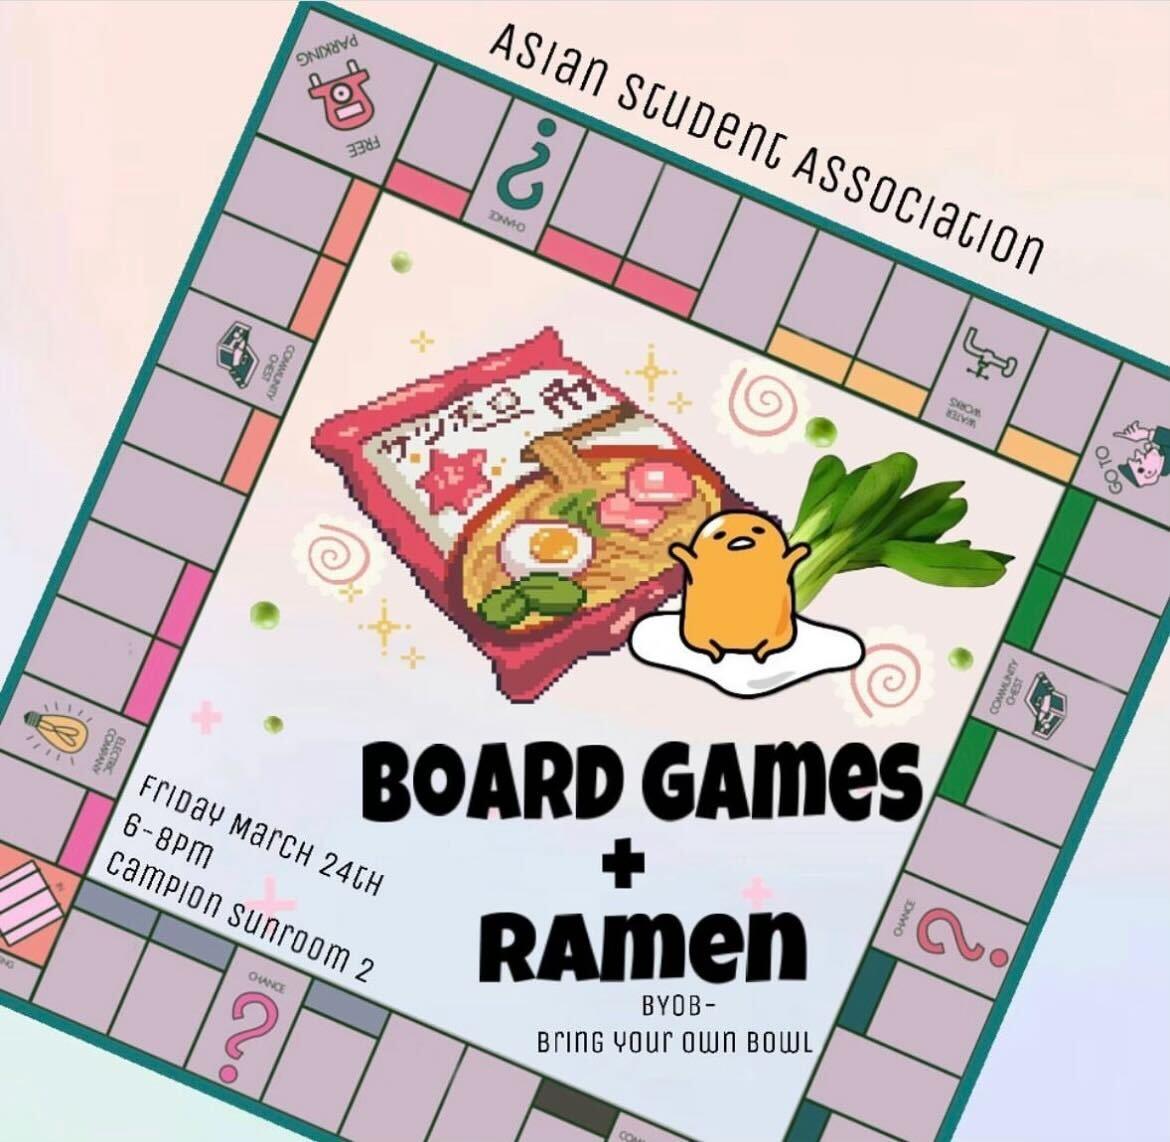 Asian Student Association (ASA) invites students to a night of board games and ramen noodles. GRAPHIC COURTESY OF ASA